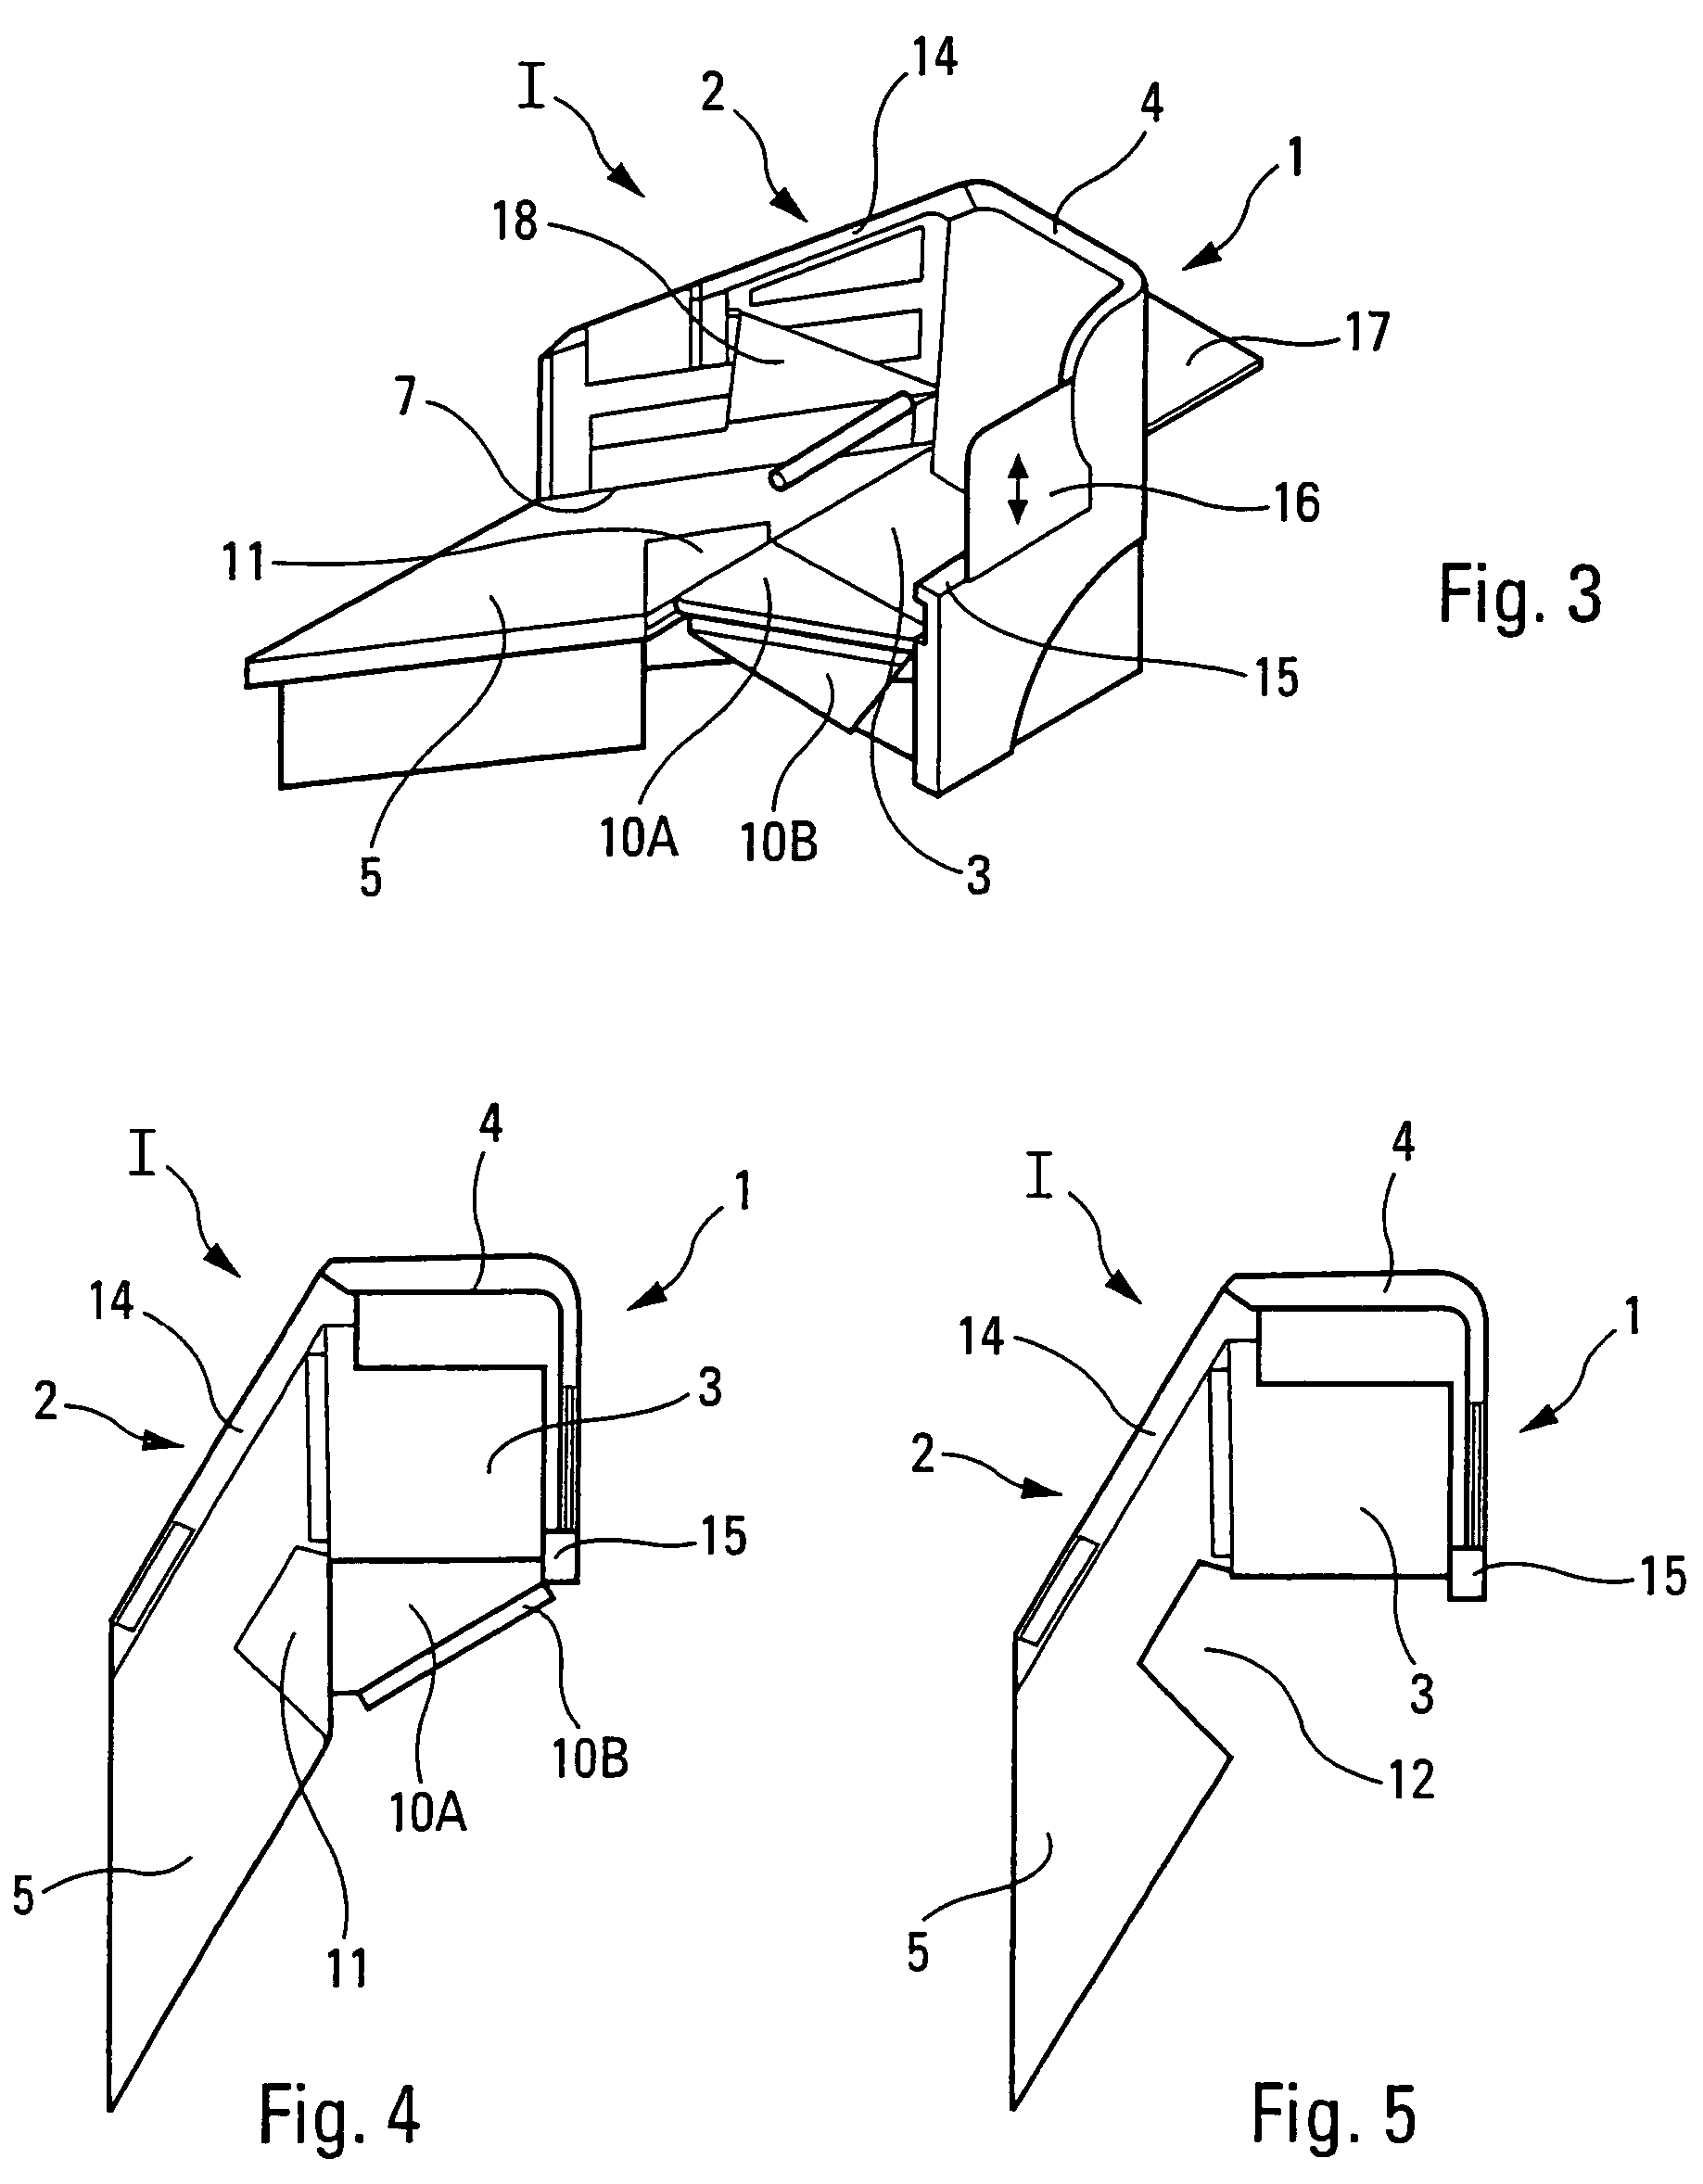 Furniture unit for a vehicle, especially an aircraft